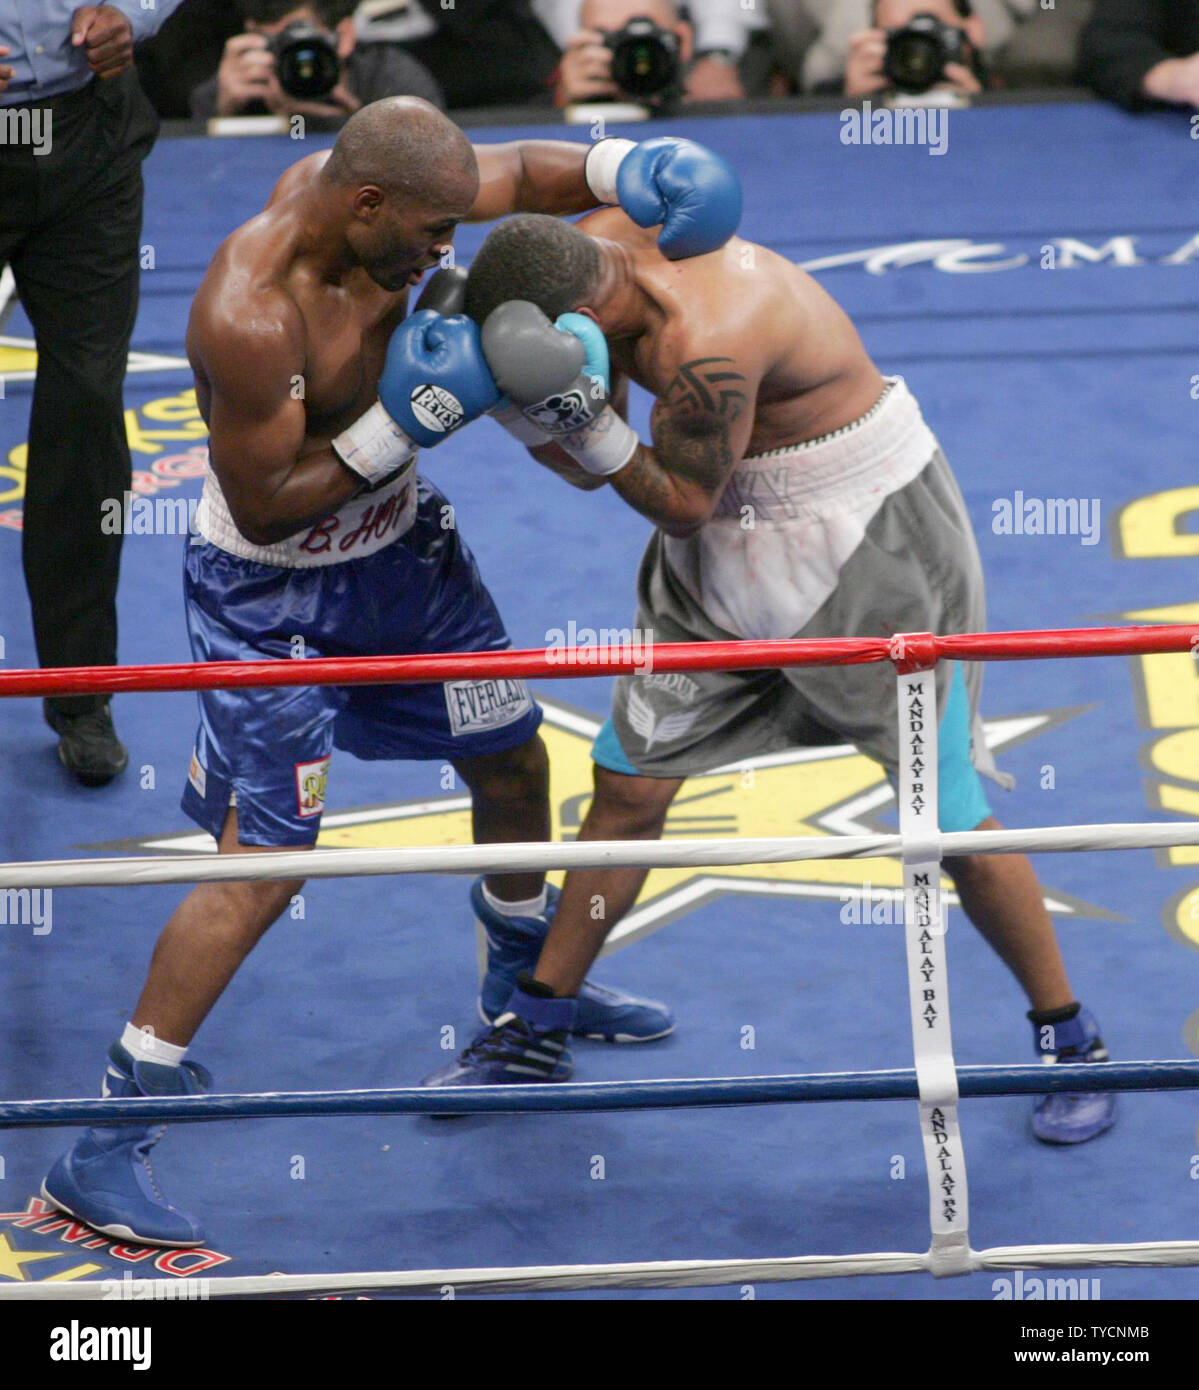 Champion Bernard Hopkins (L) hits challenger Winky Wright with a right  during the Ring Magazine Light Heavyweight title fight at Mandalay Bay in Las Vegas on July 21, 2007. Hopkins won by decision.  (UPI Photo/Roger Williams) Stock Photo